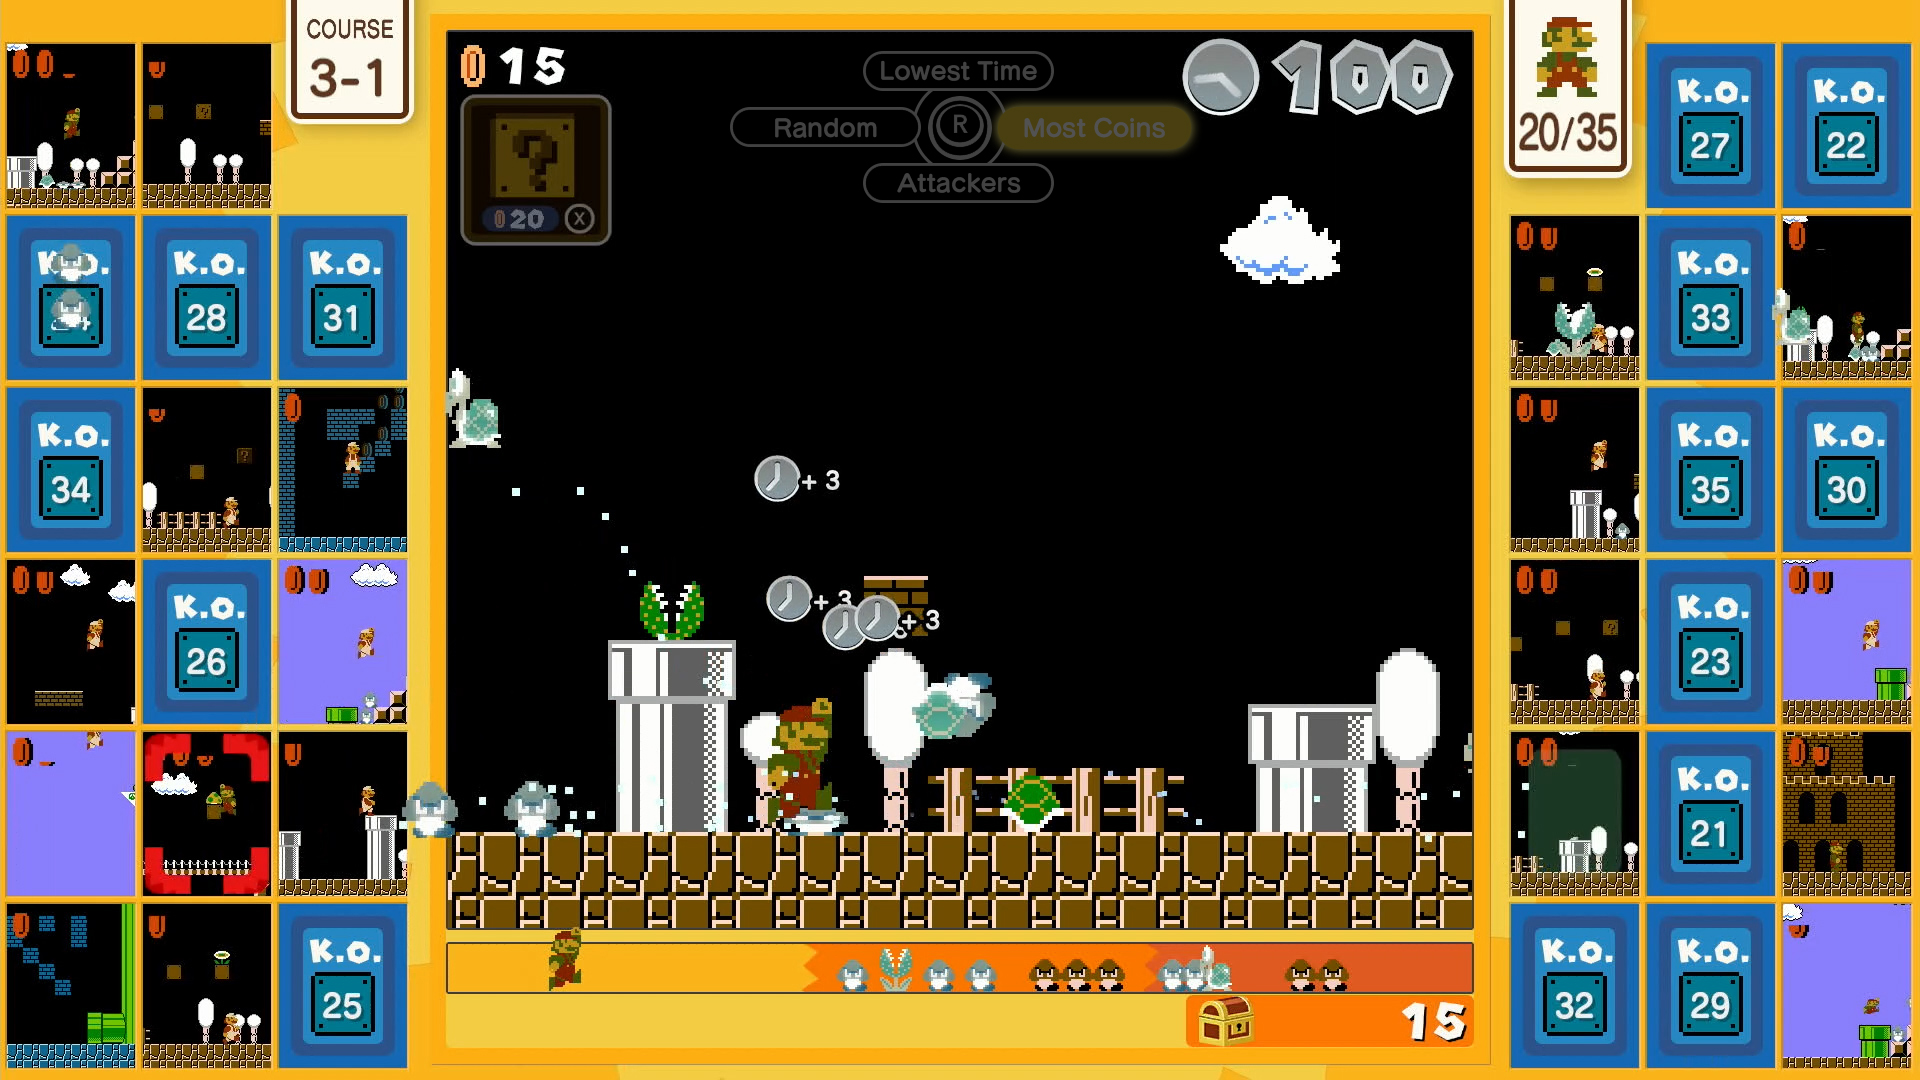 Super Mario Bros. 35' Turns the Classic Platformer Into a Battle Royale